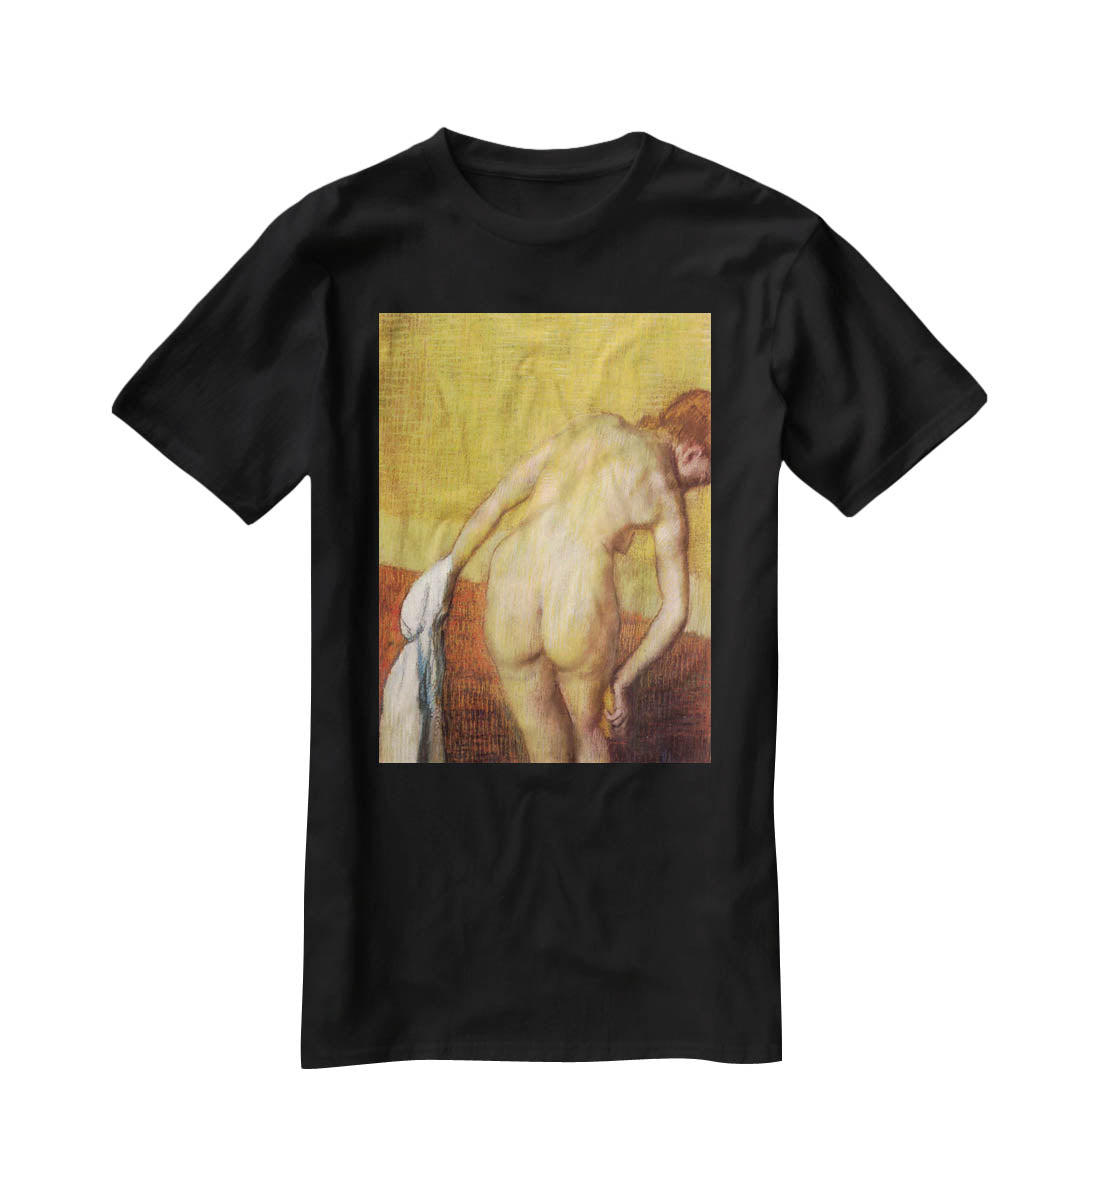 Woman Drying with towel and sponge by Degas T-Shirt - Canvas Art Rocks - 1